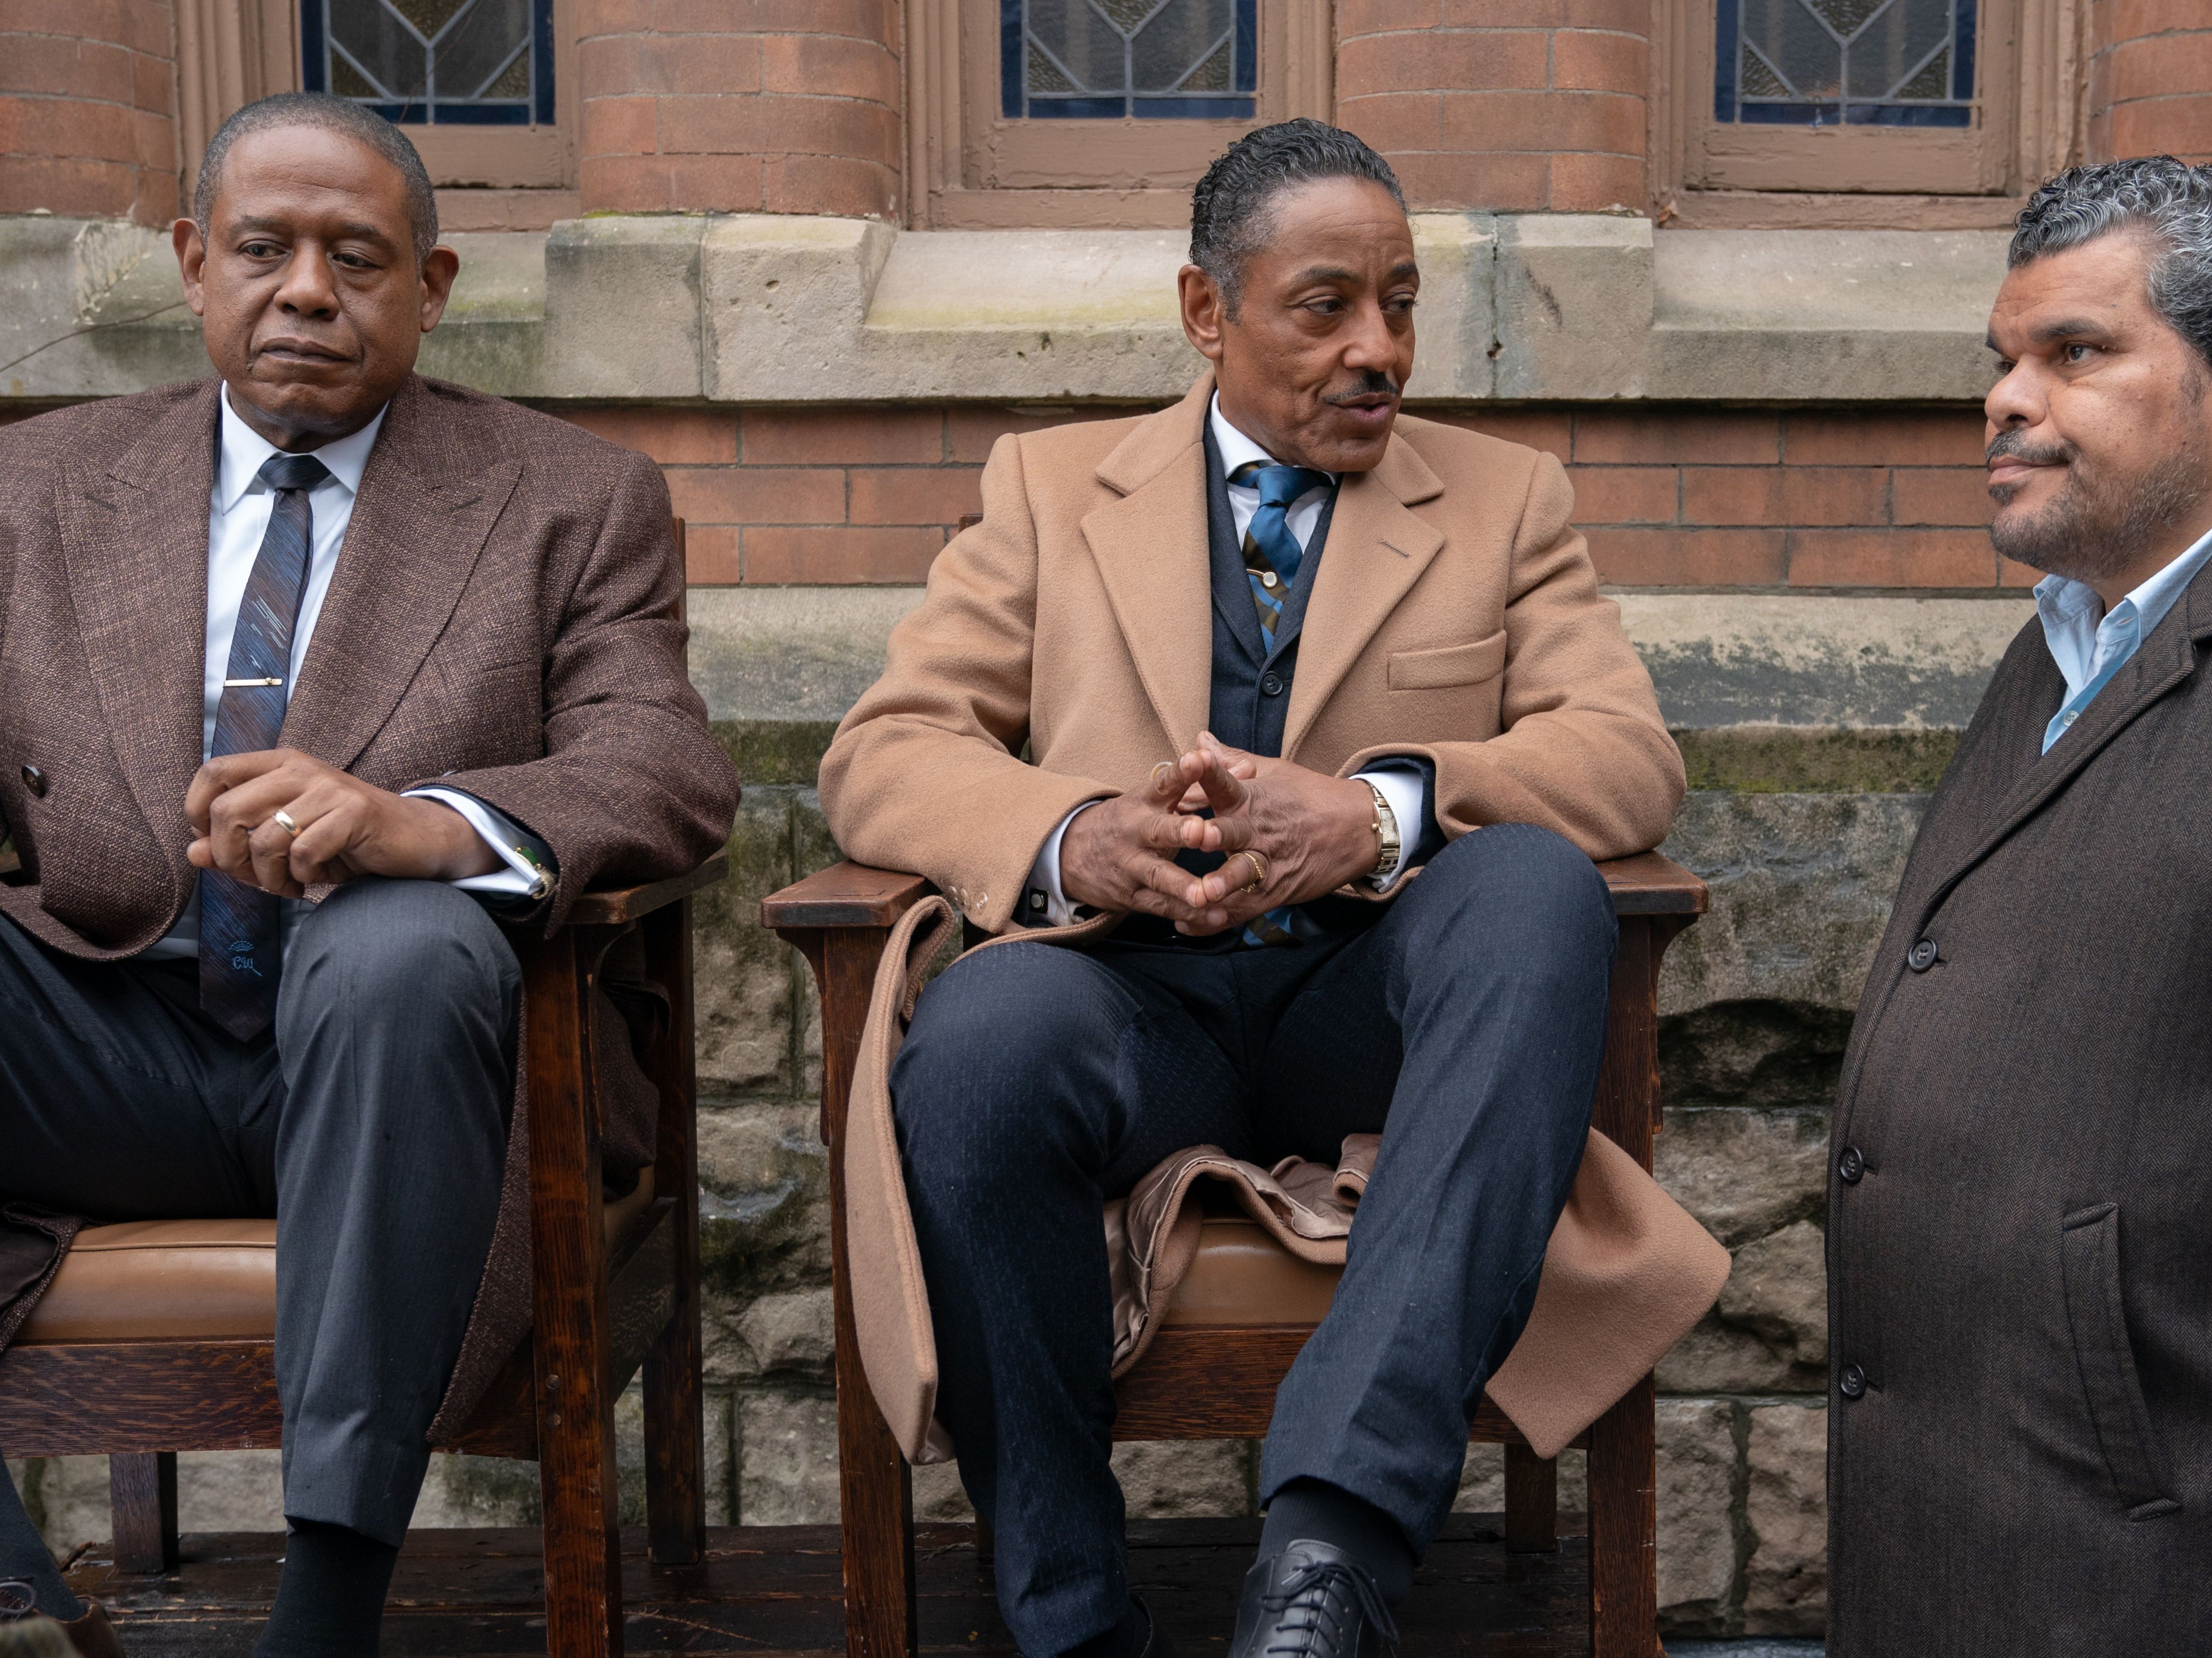 Forest Whitaker, Giancarlo Esposito and Luis Guzman in Godfather of Harlem (2019)